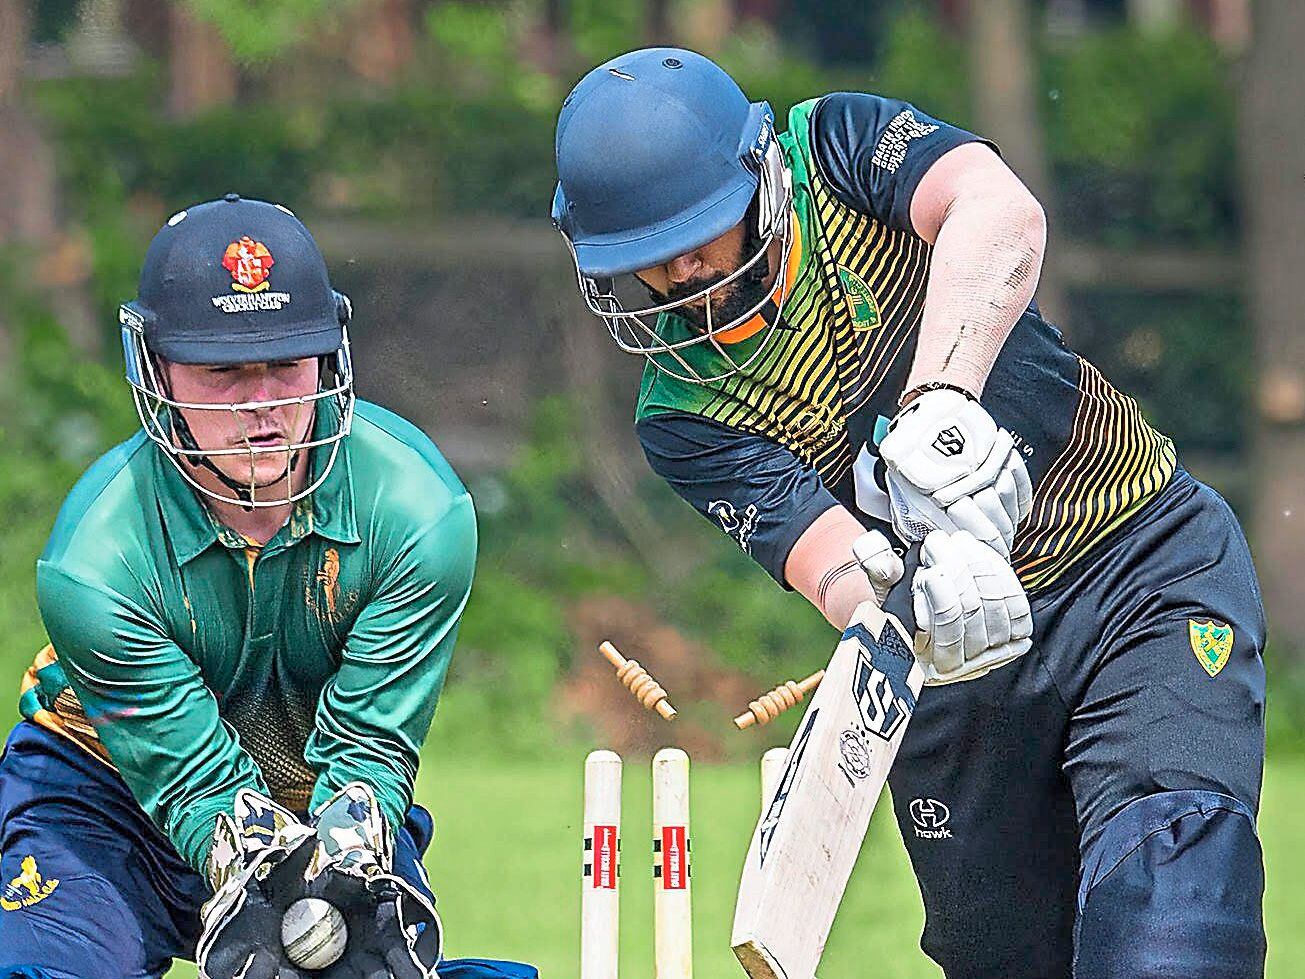 Fordhouses captain says unbeaten leaders are yet to play best cricket